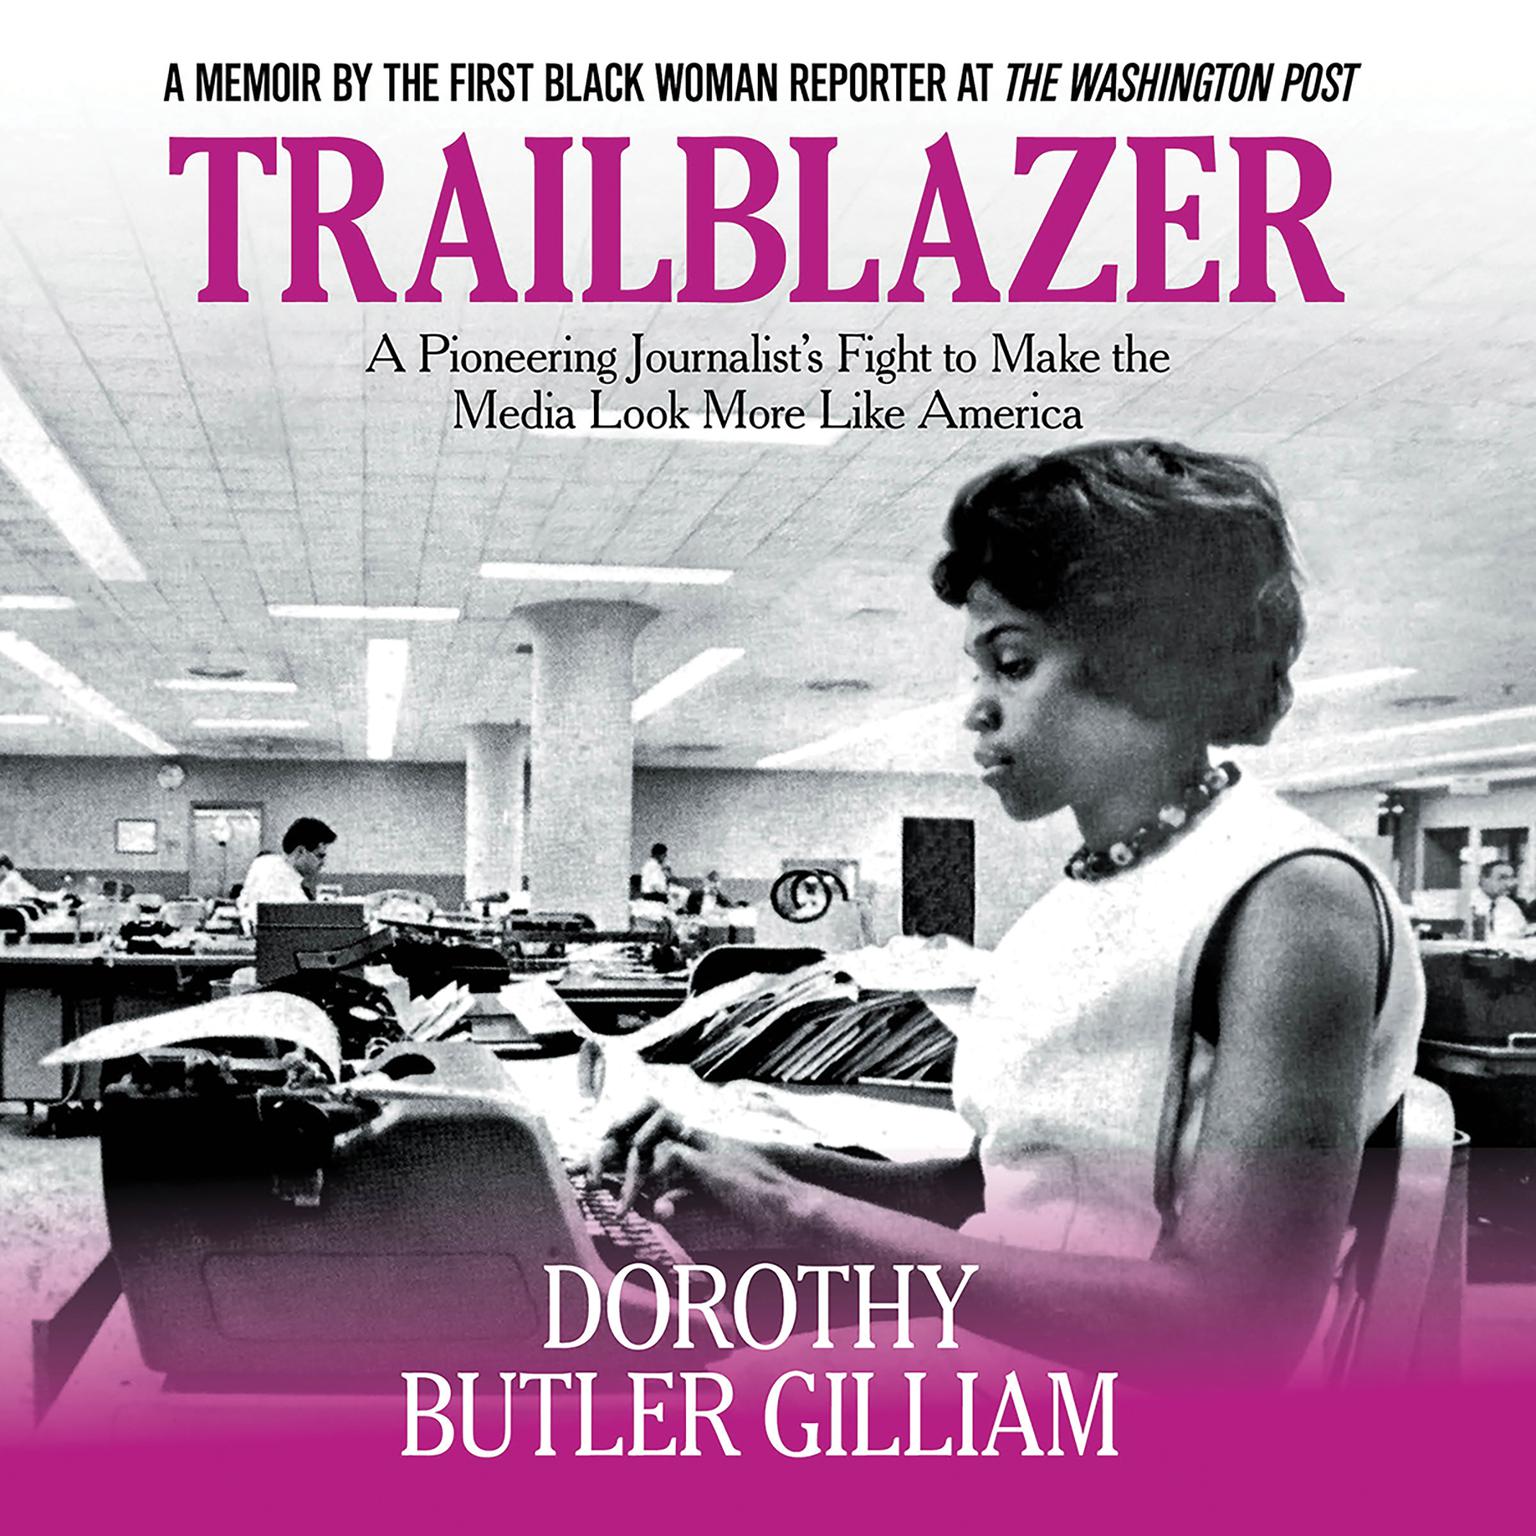 Trailblazer: A Pioneering Journalists Fight to Make the Media Look More Like America Audiobook, by Dorothy Butler Gilliam